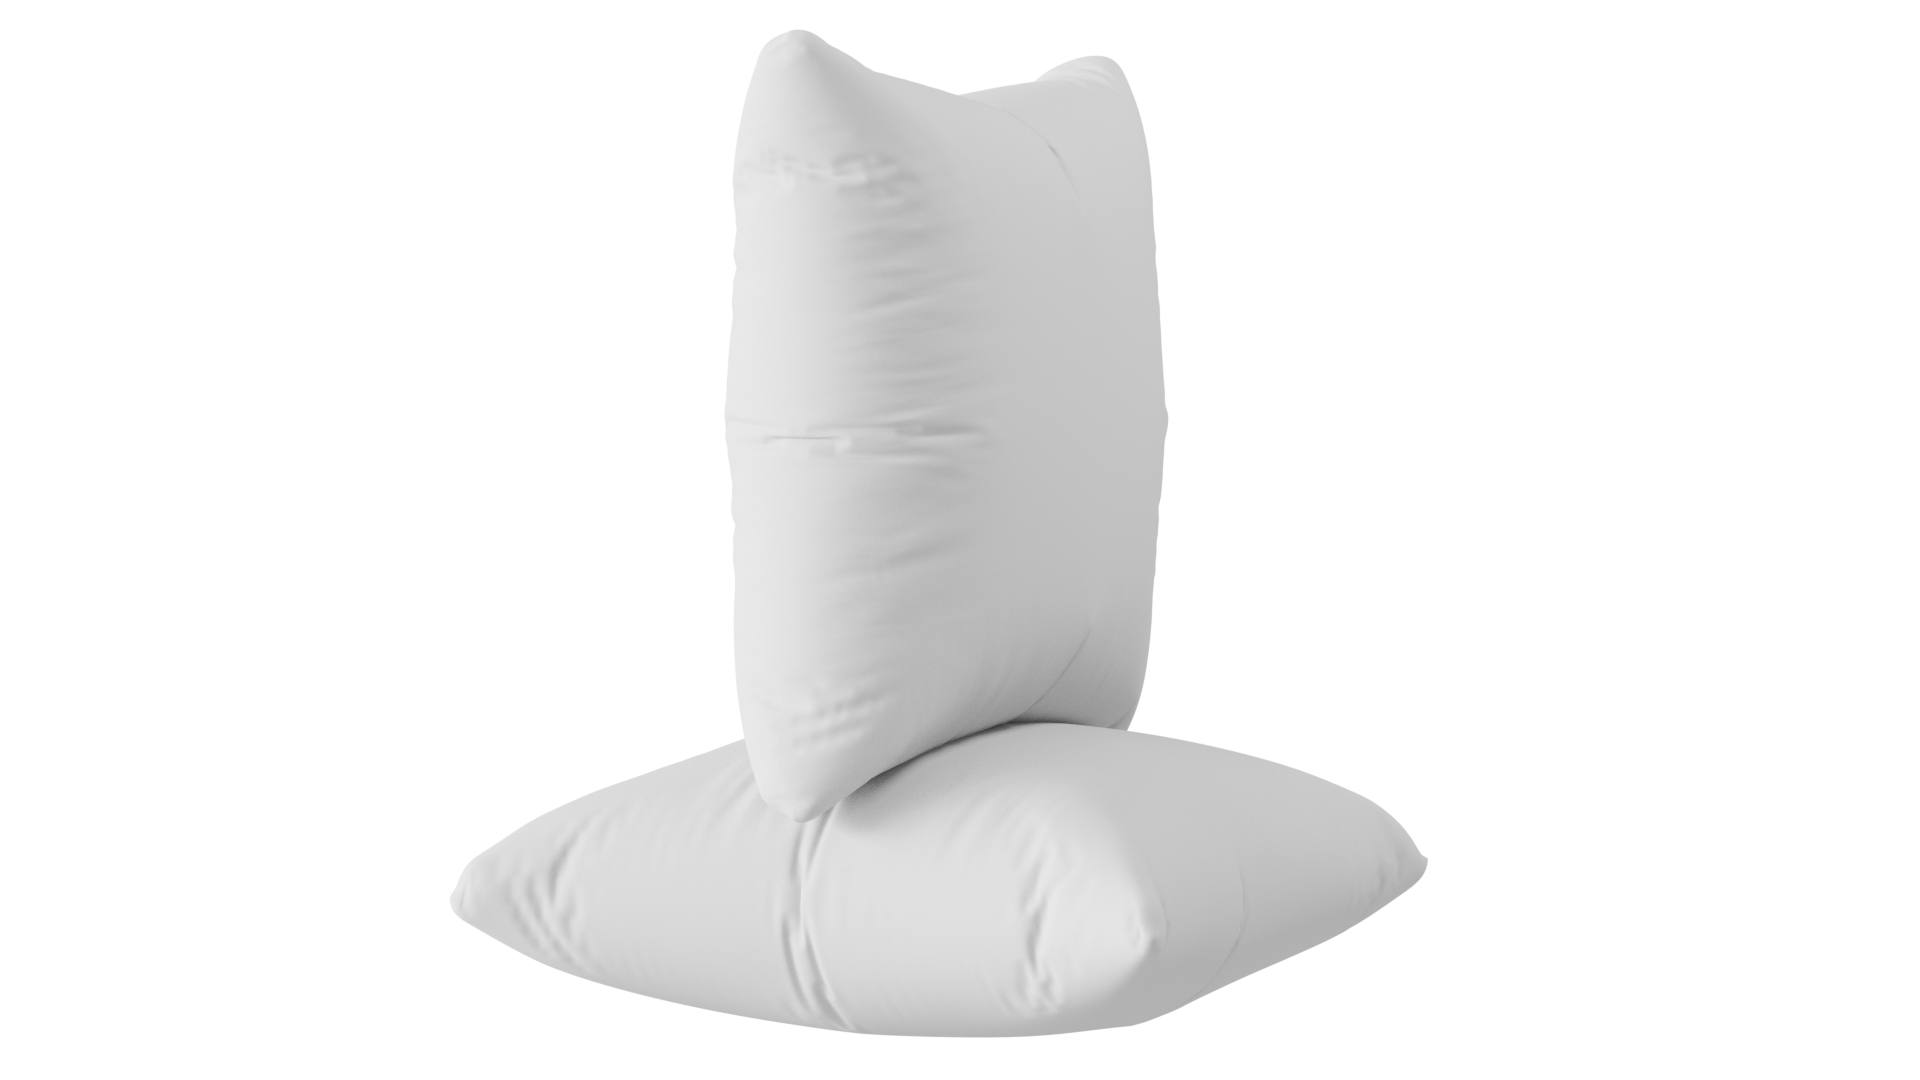 Utopia Bedding Throw Pillows Insert (Pack of 2, White) - 18 x 18 Inches Bed